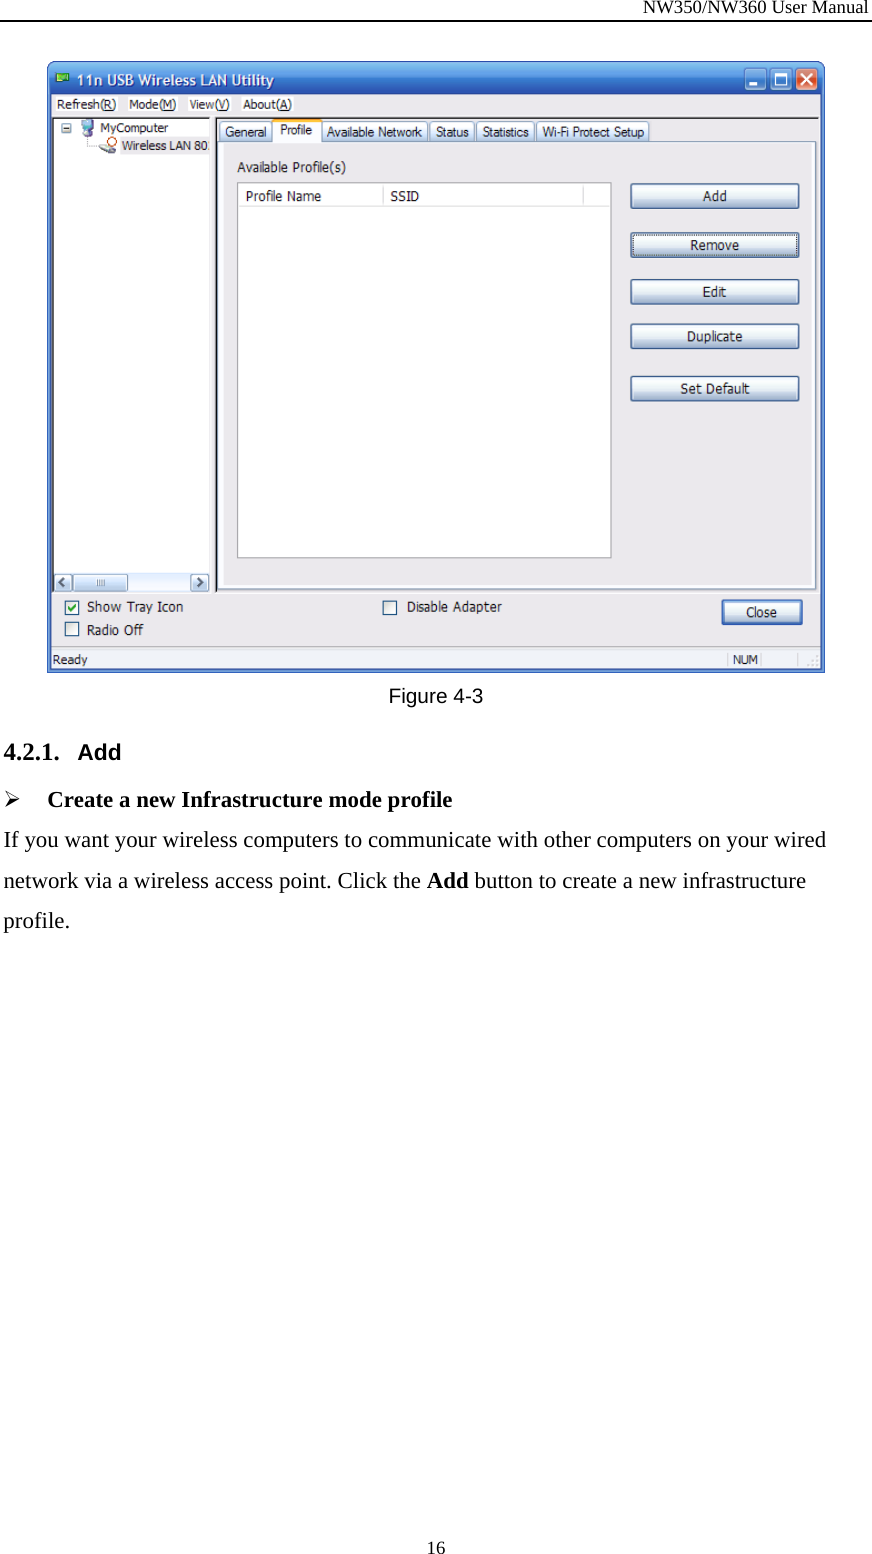 NW350/NW360 User Manual  16 Figure  4-3 4.2.1. Add   ¾ Create a new Infrastructure mode profile If you want your wireless computers to communicate with other computers on your wired network via a wireless access point. Click the Add button to create a new infrastructure profile. 